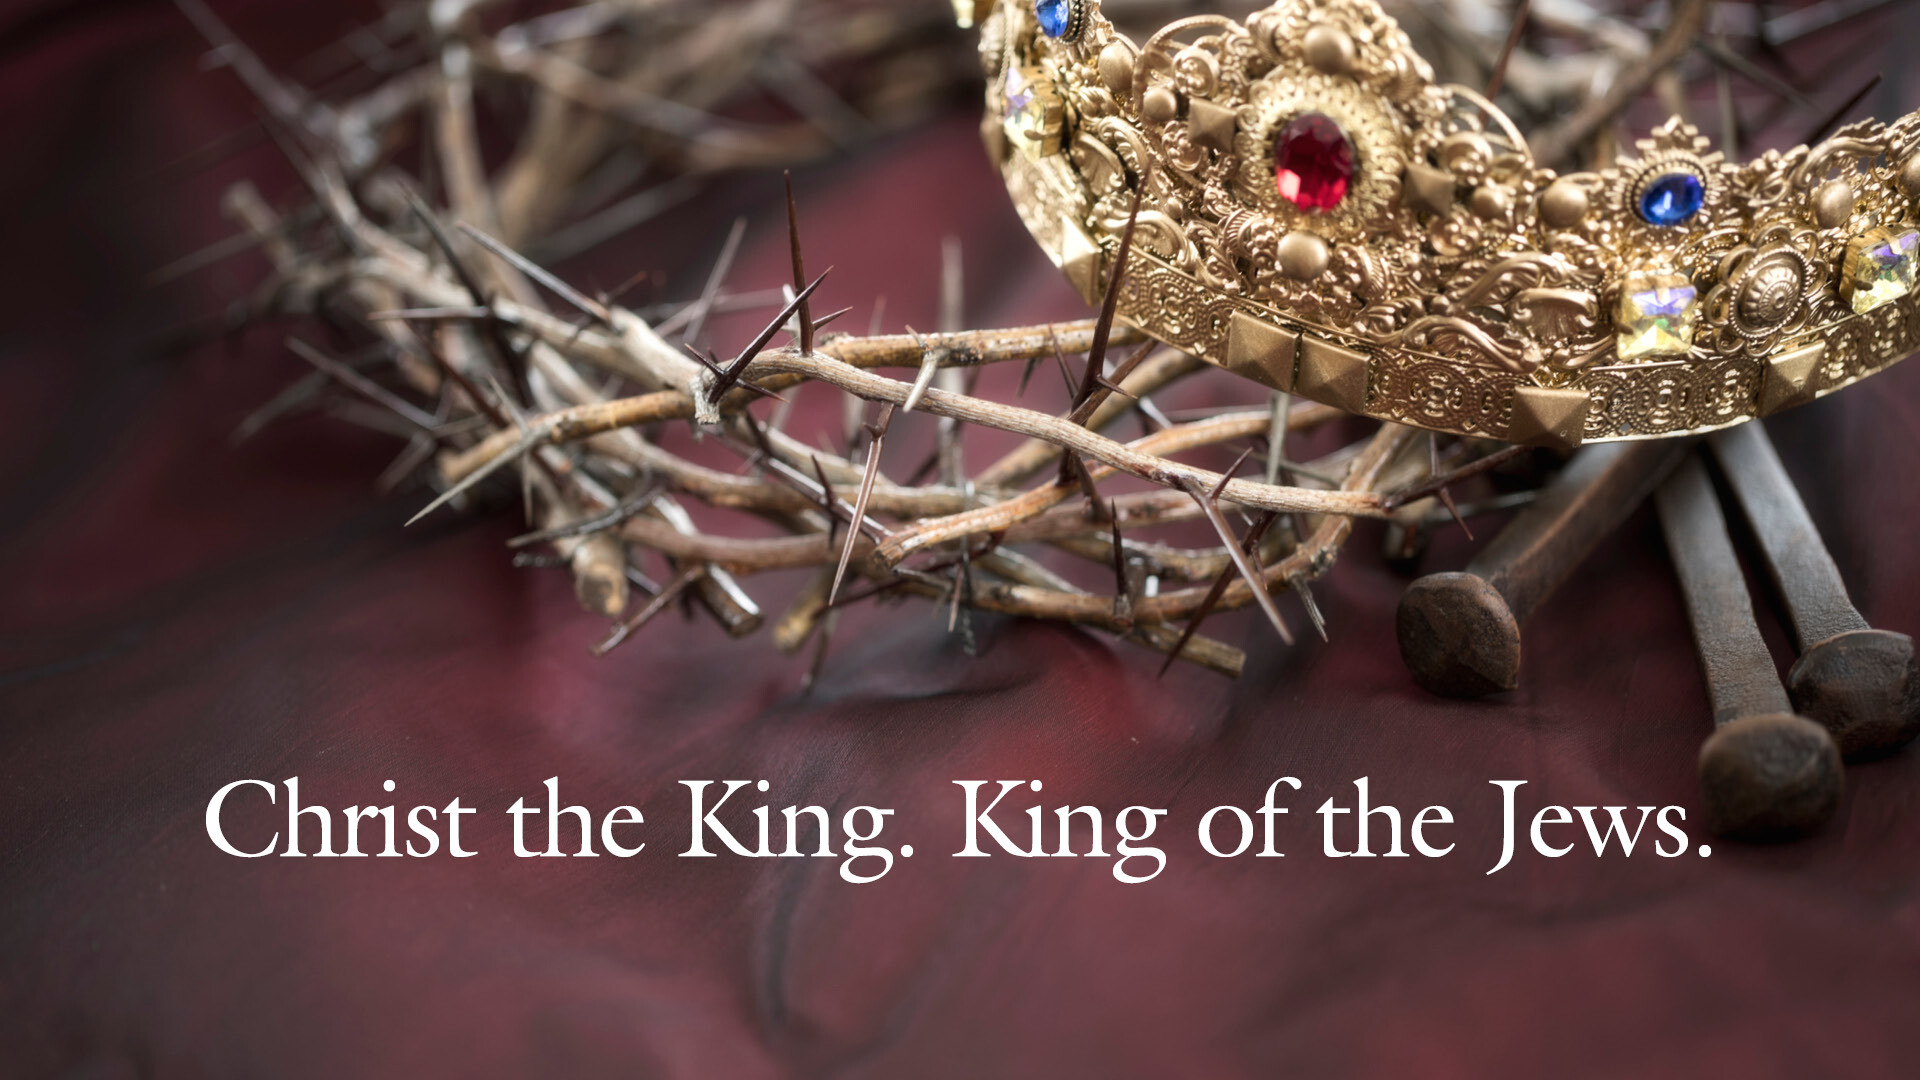 Christ the King. King of the Jews.